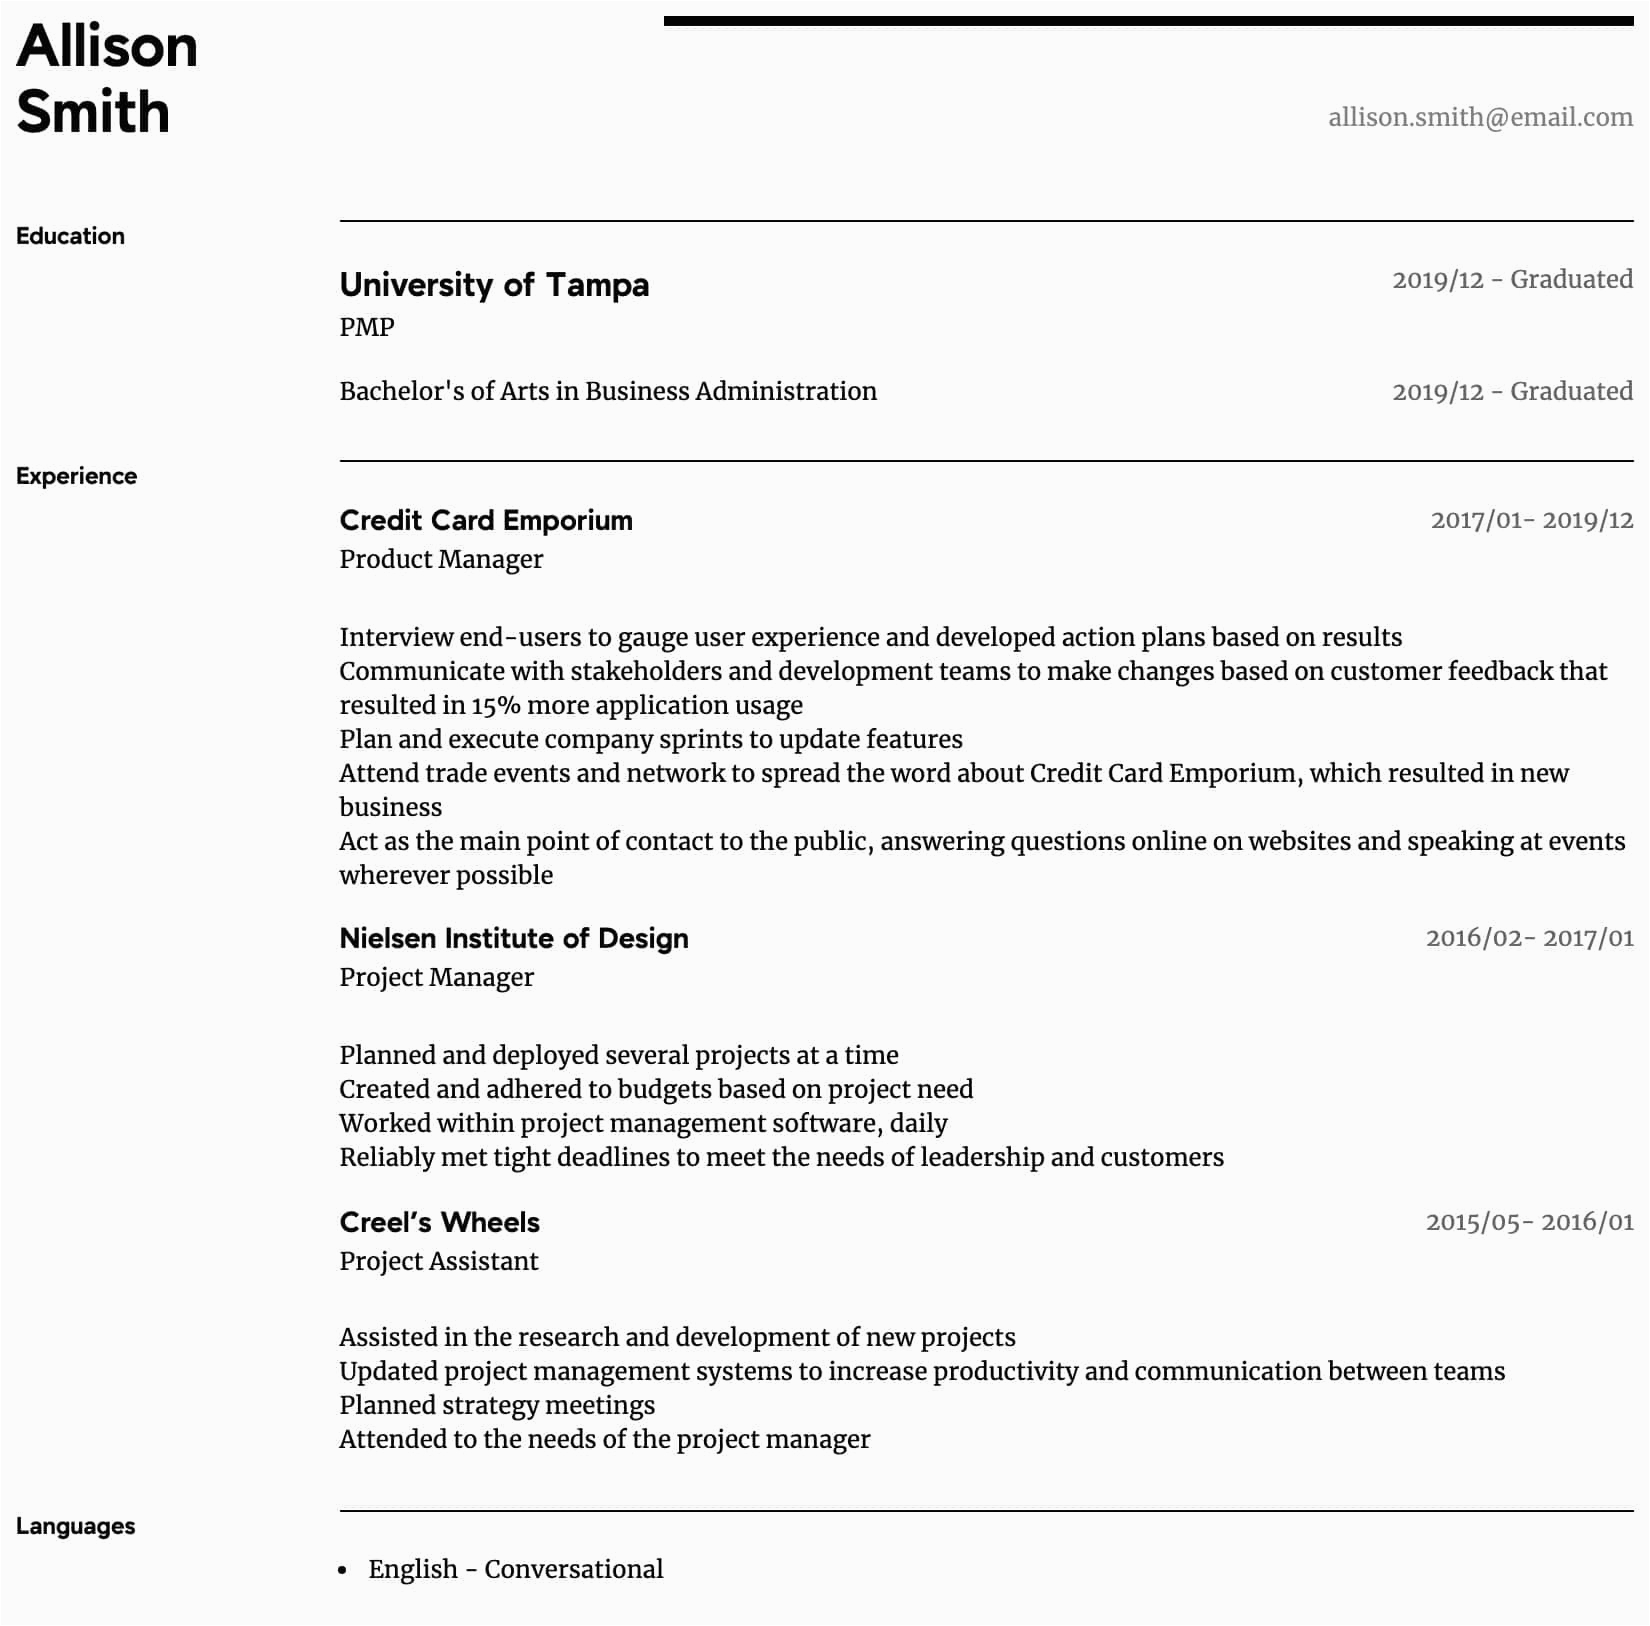 Sample Resume Relevant Skills and Experience Program Manager Resume Samples